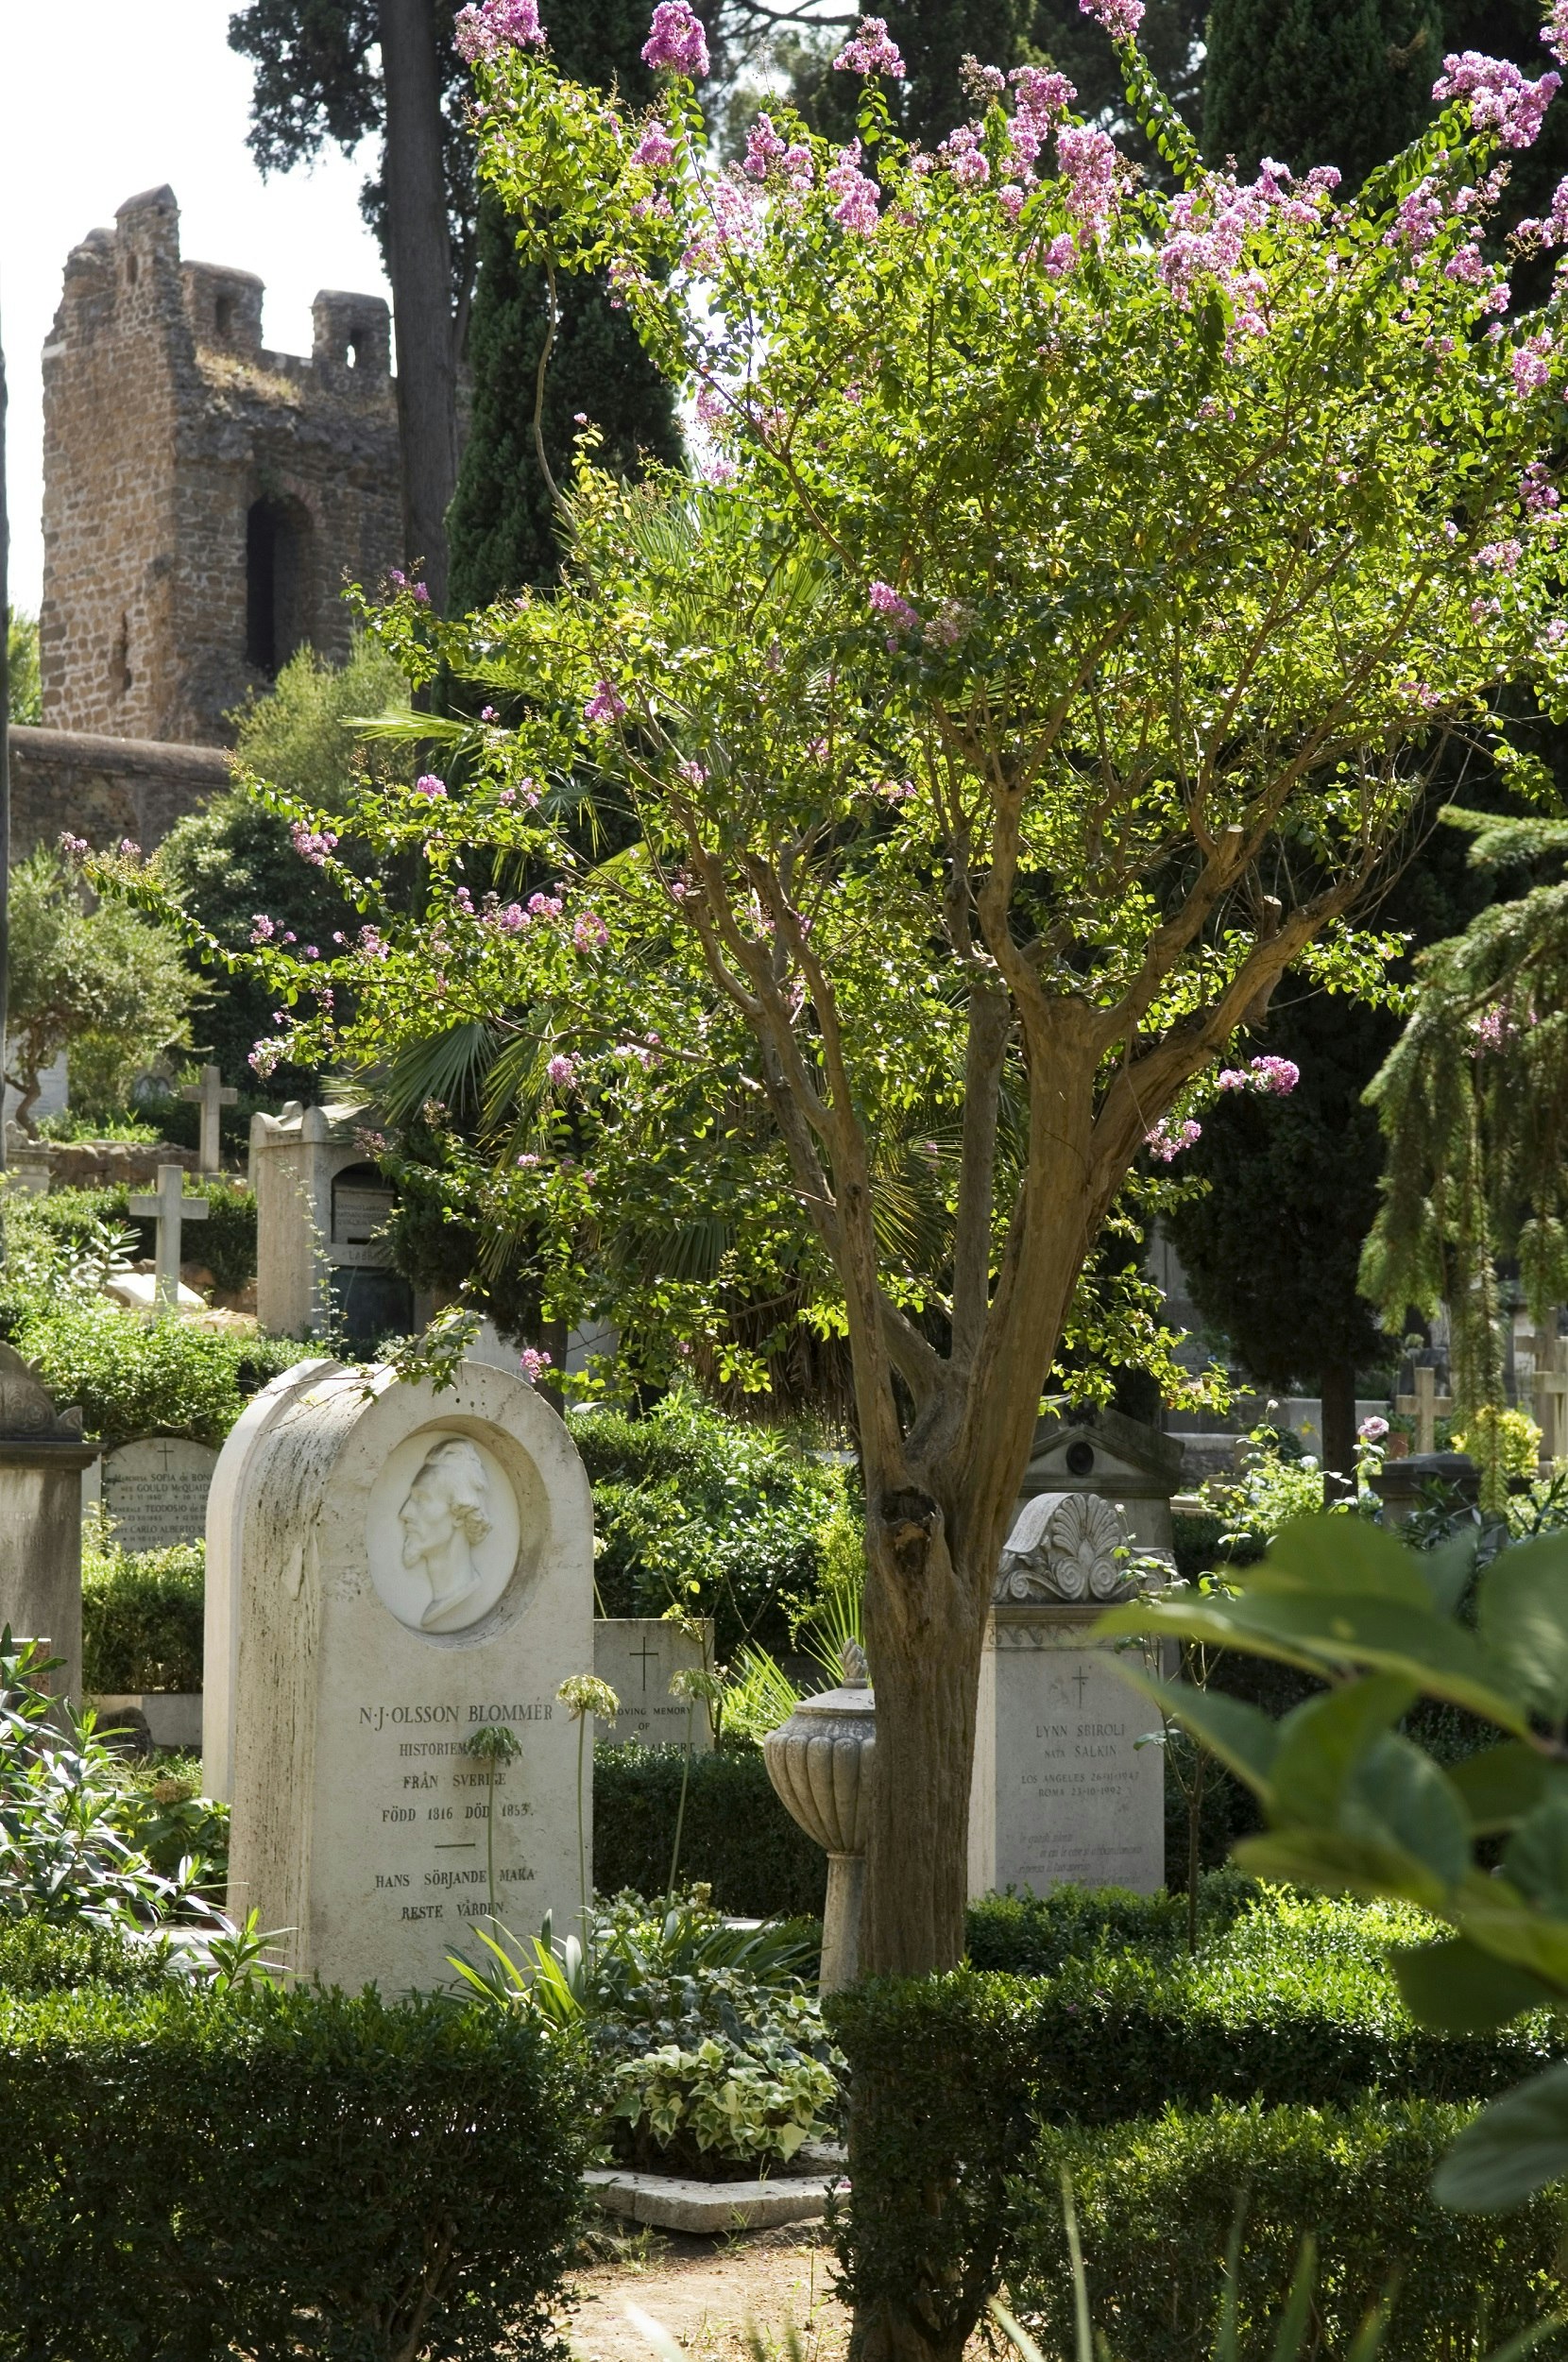 Lush trees and shrubs are planted in between marble headstones in a cemetery. A ruined building lies beyond the cemetery walls.